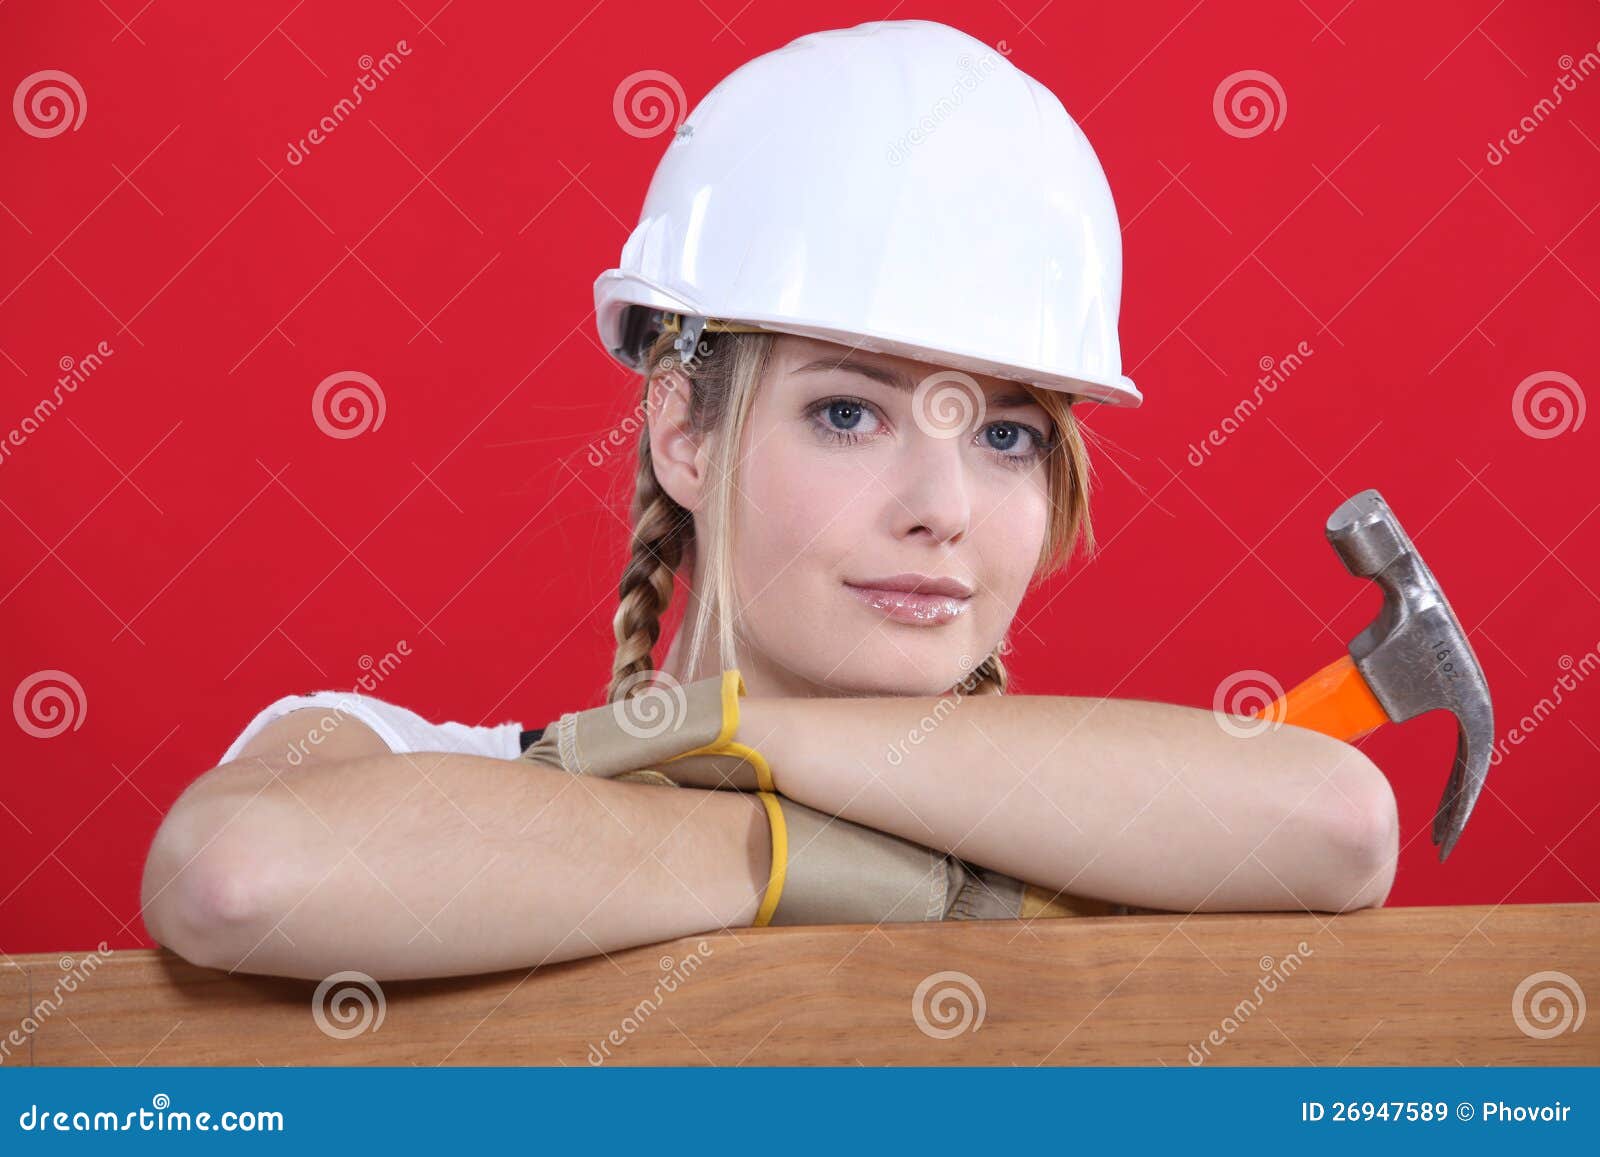 Construction Worker Holding Hammer Stock Image Image Of